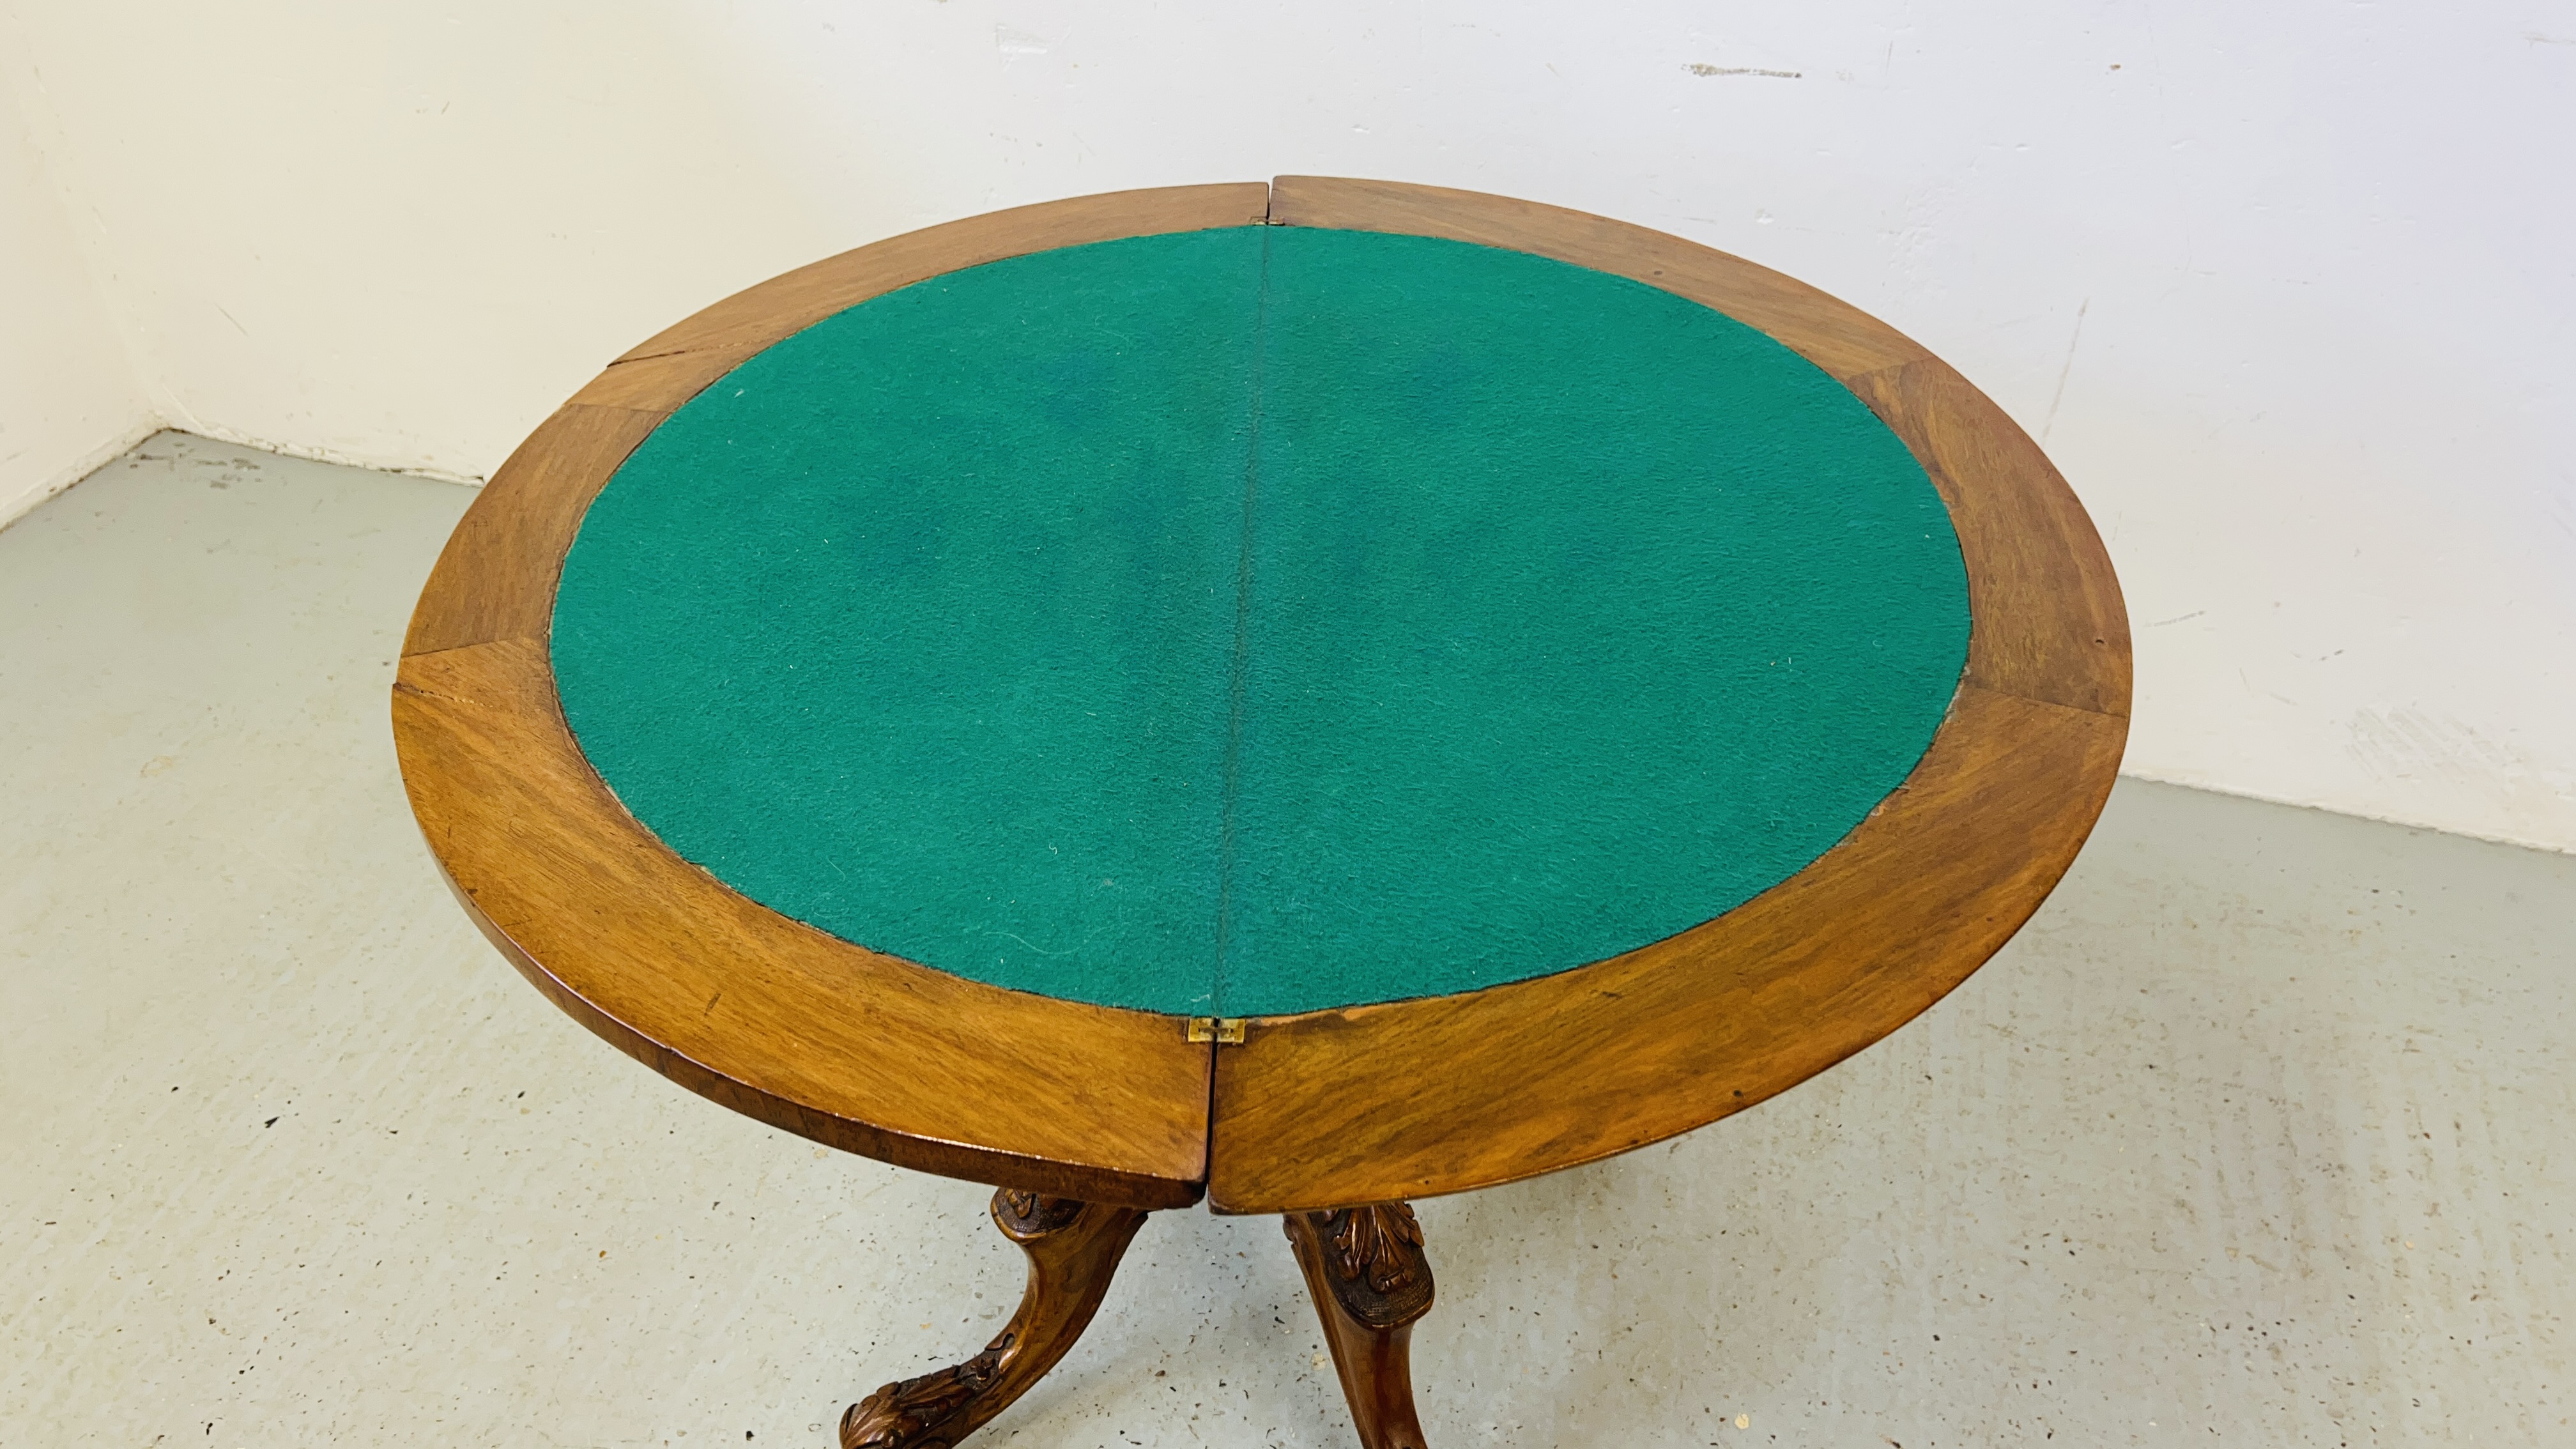 EDWARDIAN WALNUT SINGLE PEDESTAL CARD/GAMES TABLE WITH BAIZE INSERT INLAID DETAIL DIA. 92CM. - Image 8 of 10